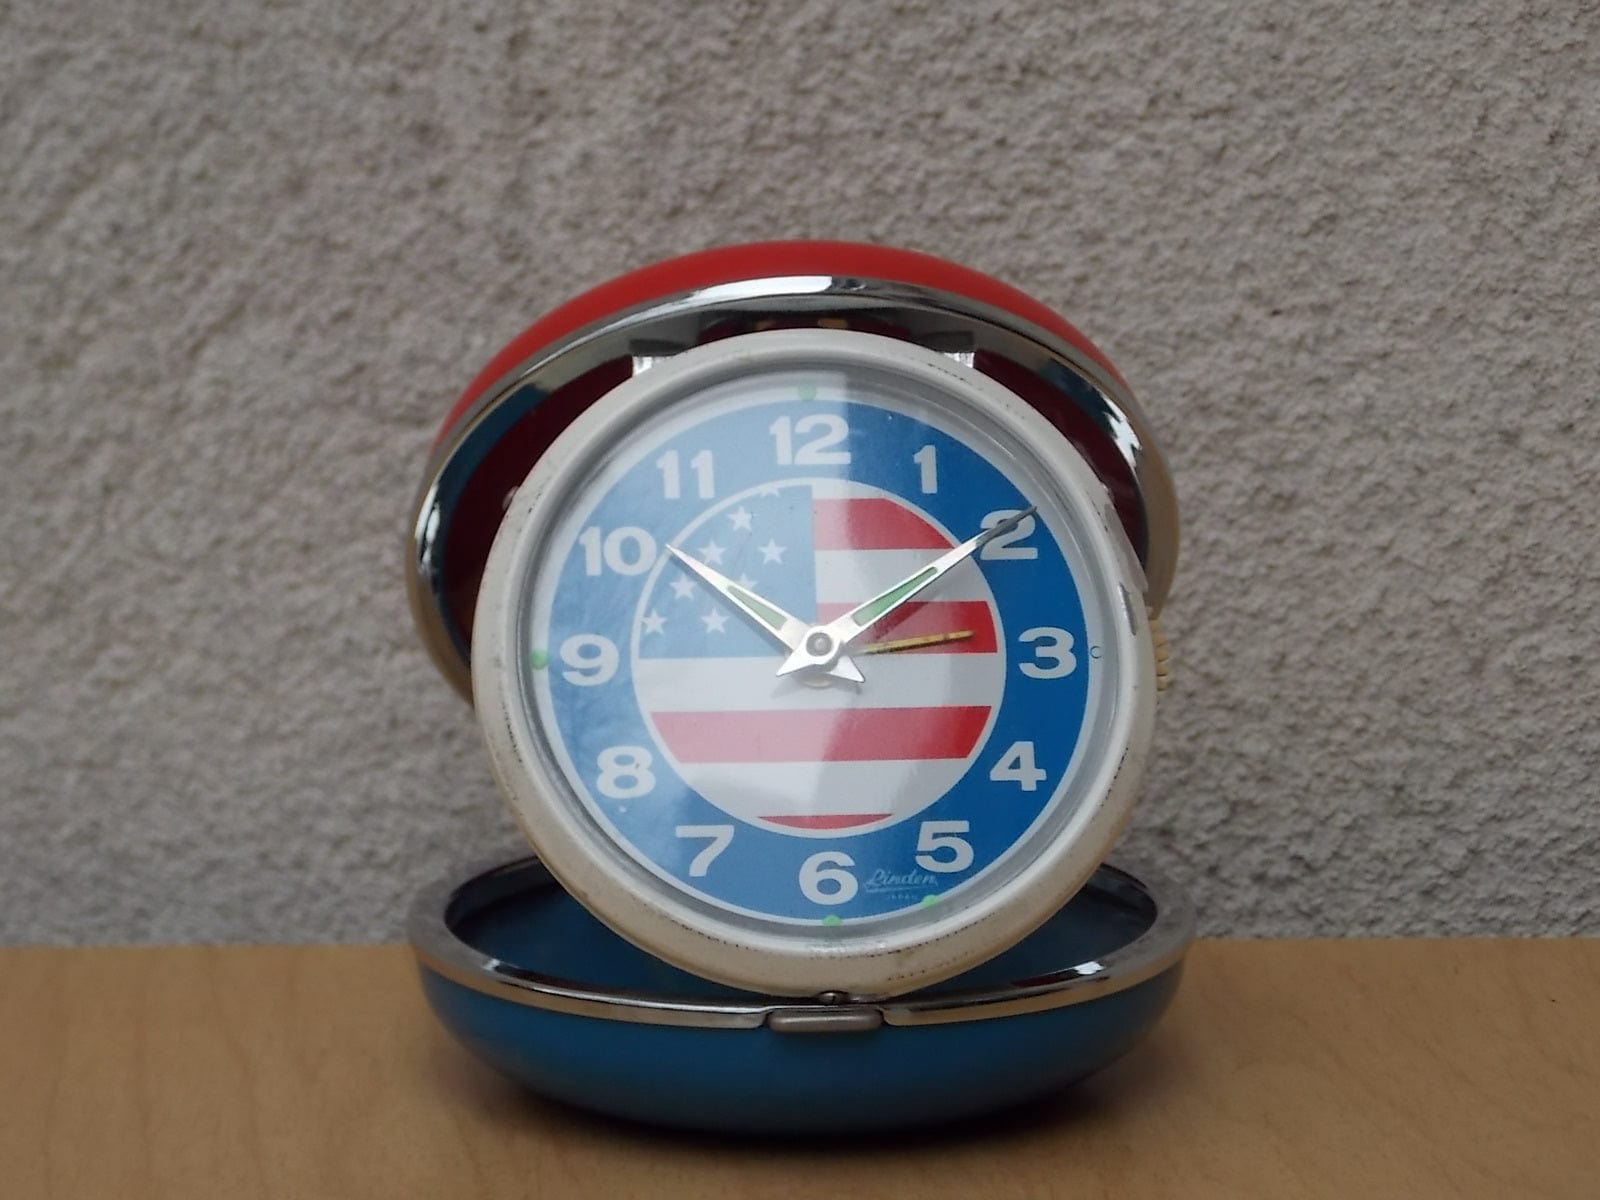 I Like Mike's Mid Century Modern Clock Linden Red, White & Blue U.S. Flag Travel Clock, Wind Up